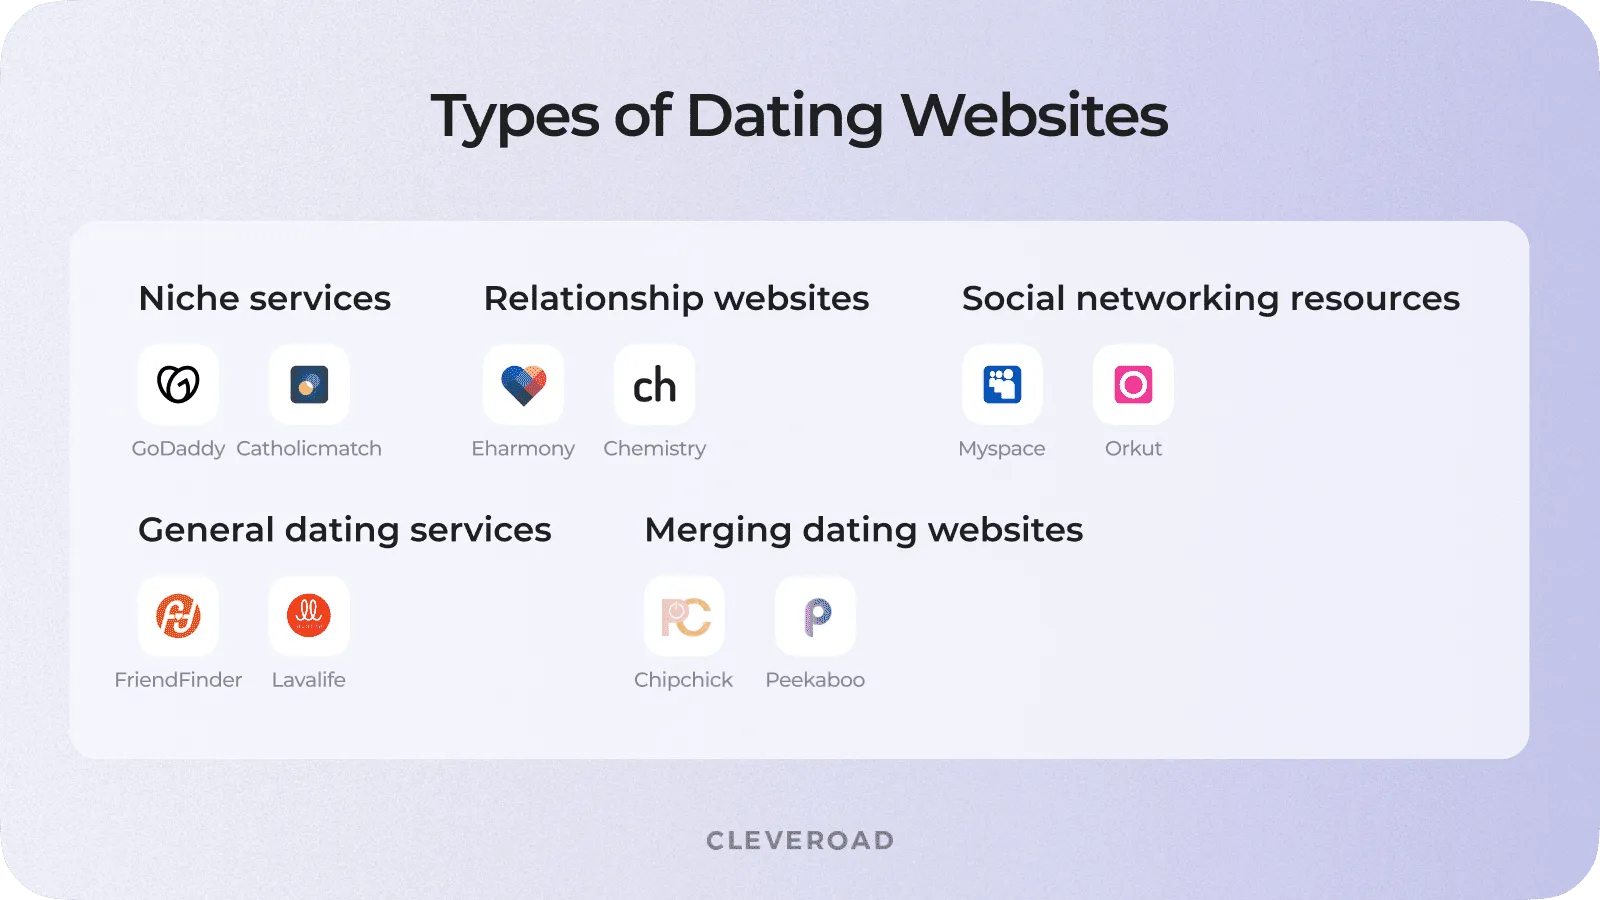 Types of dating websites and their examples